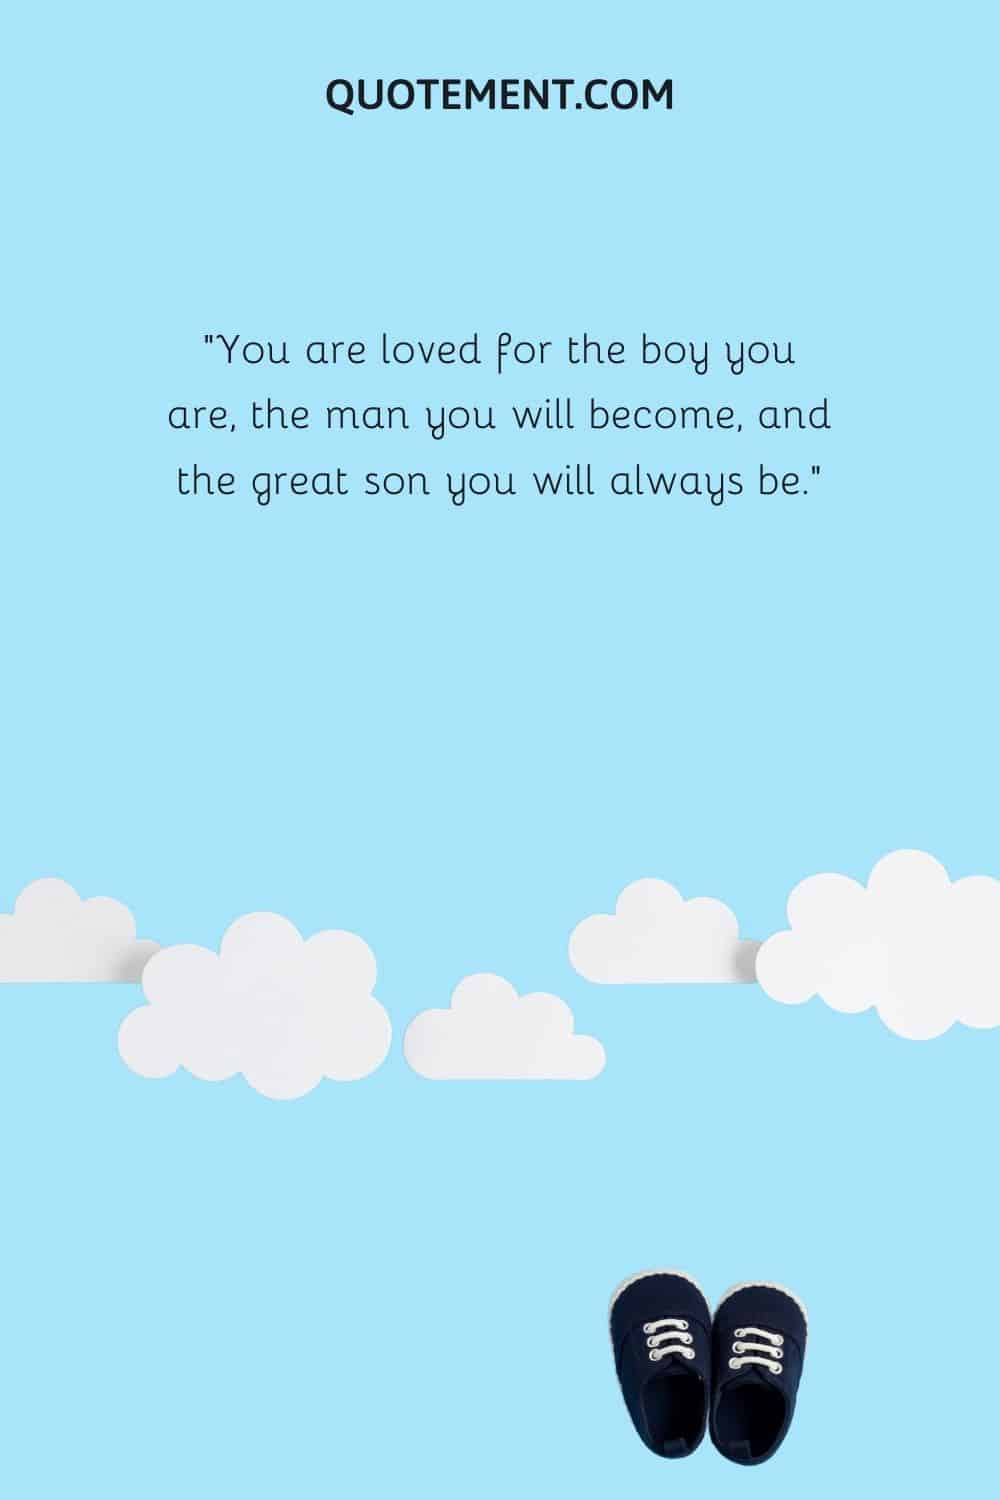 You are loved for the boy you are, the man you will become, and the great son you will always be